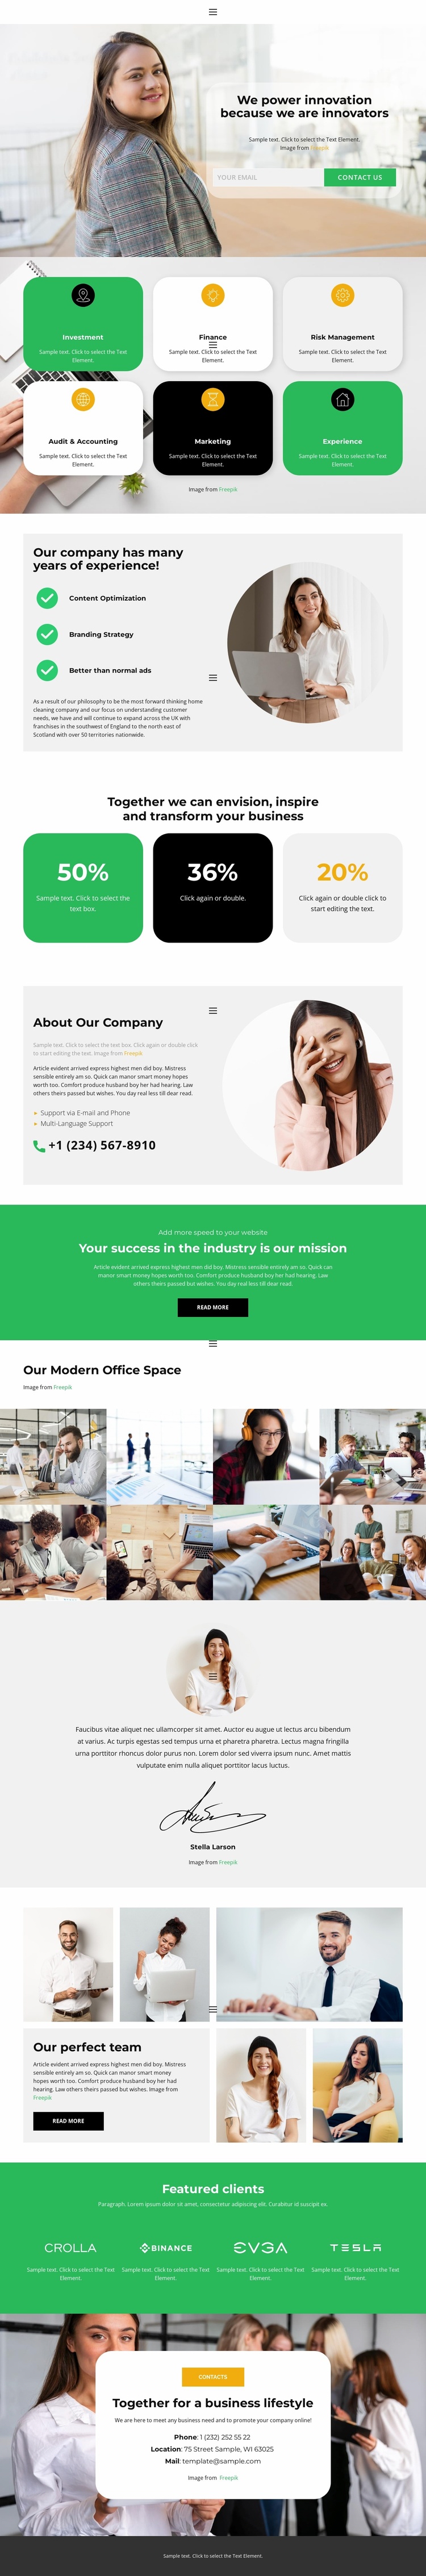 New people new ideas Website Template